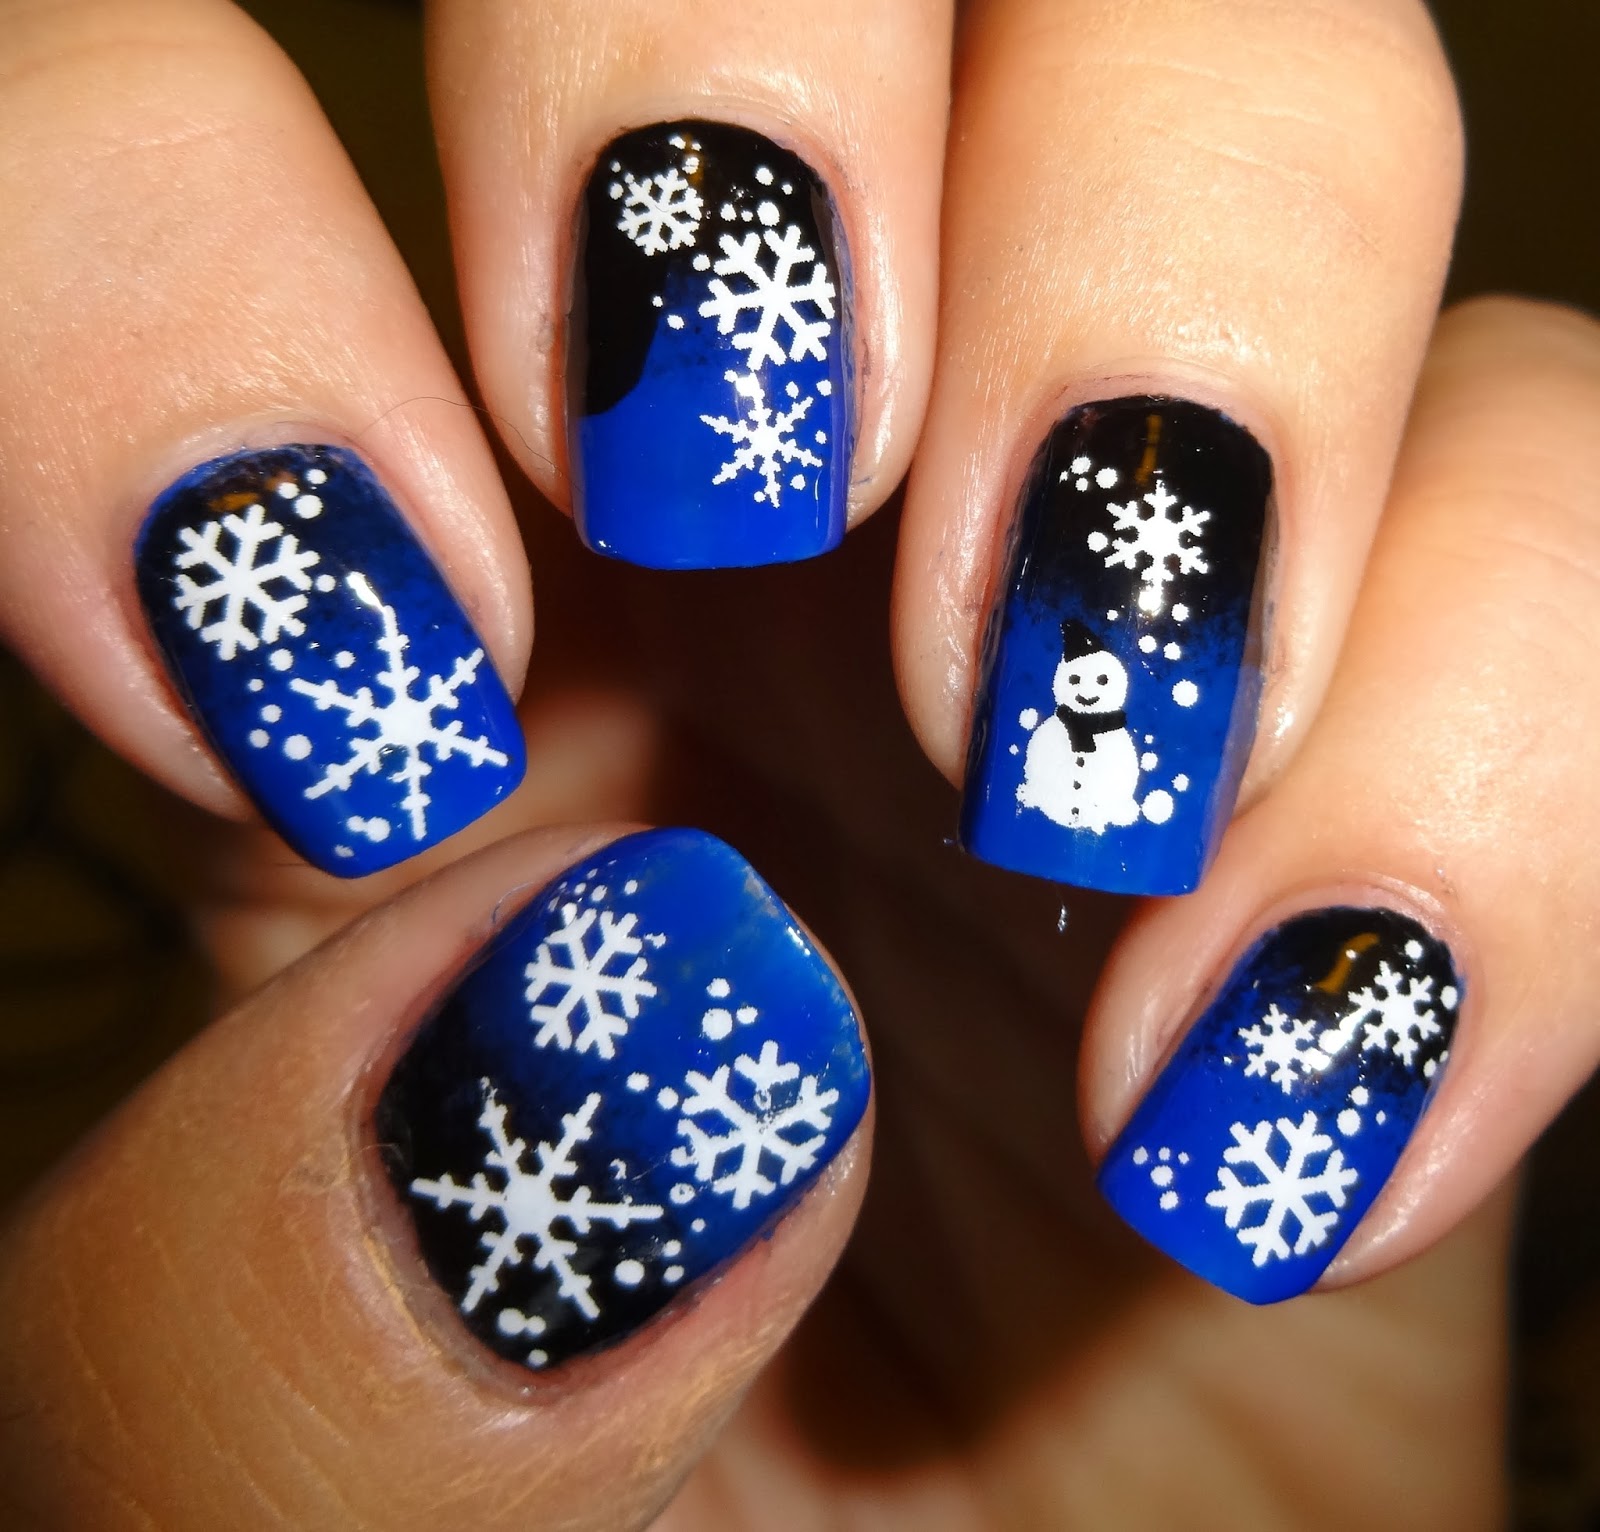 Wendy's Delights: Snowfall Water Decals from Sparkly Nails